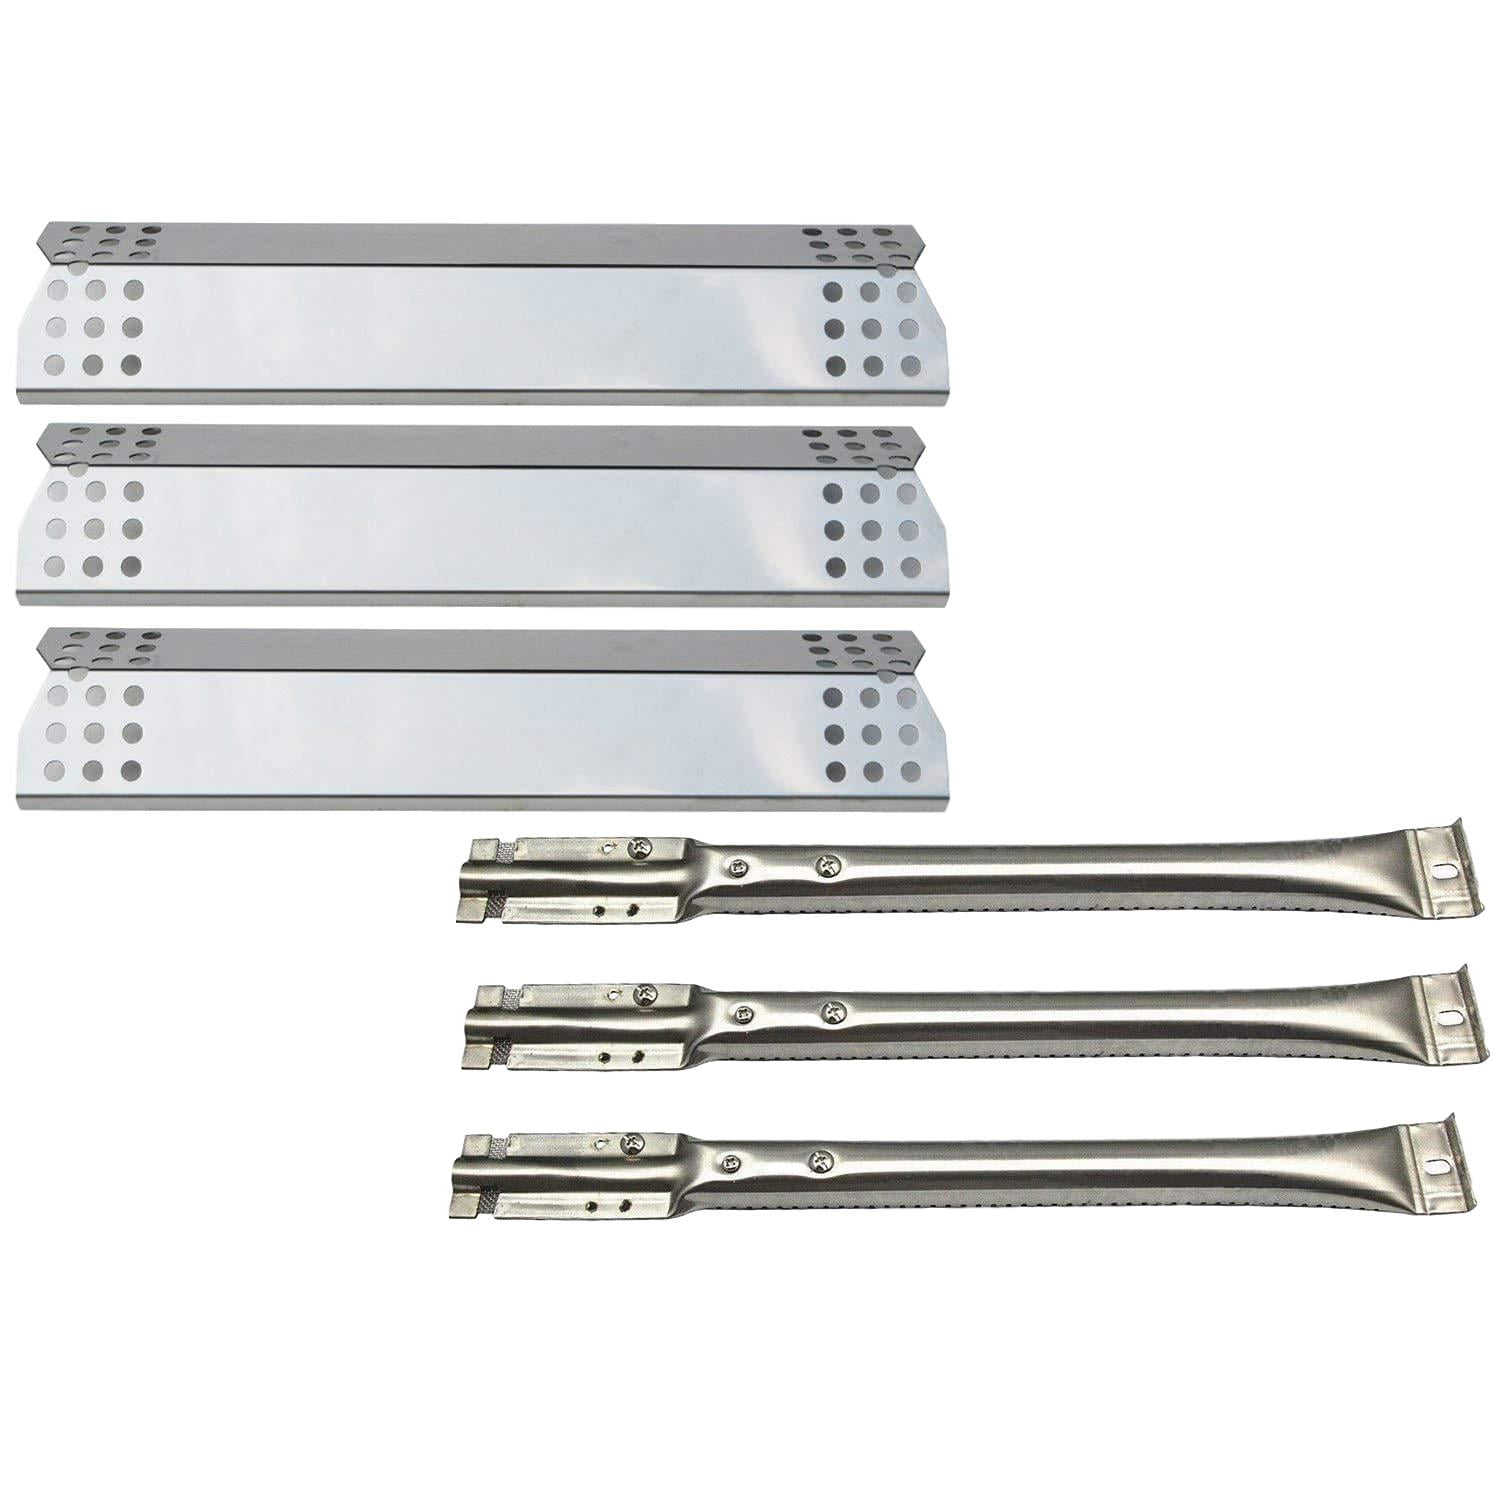 Details about   Stainless Steel Heat Plates 14 9/16" Burners 14 5/8” Replacement for Nexgrill 